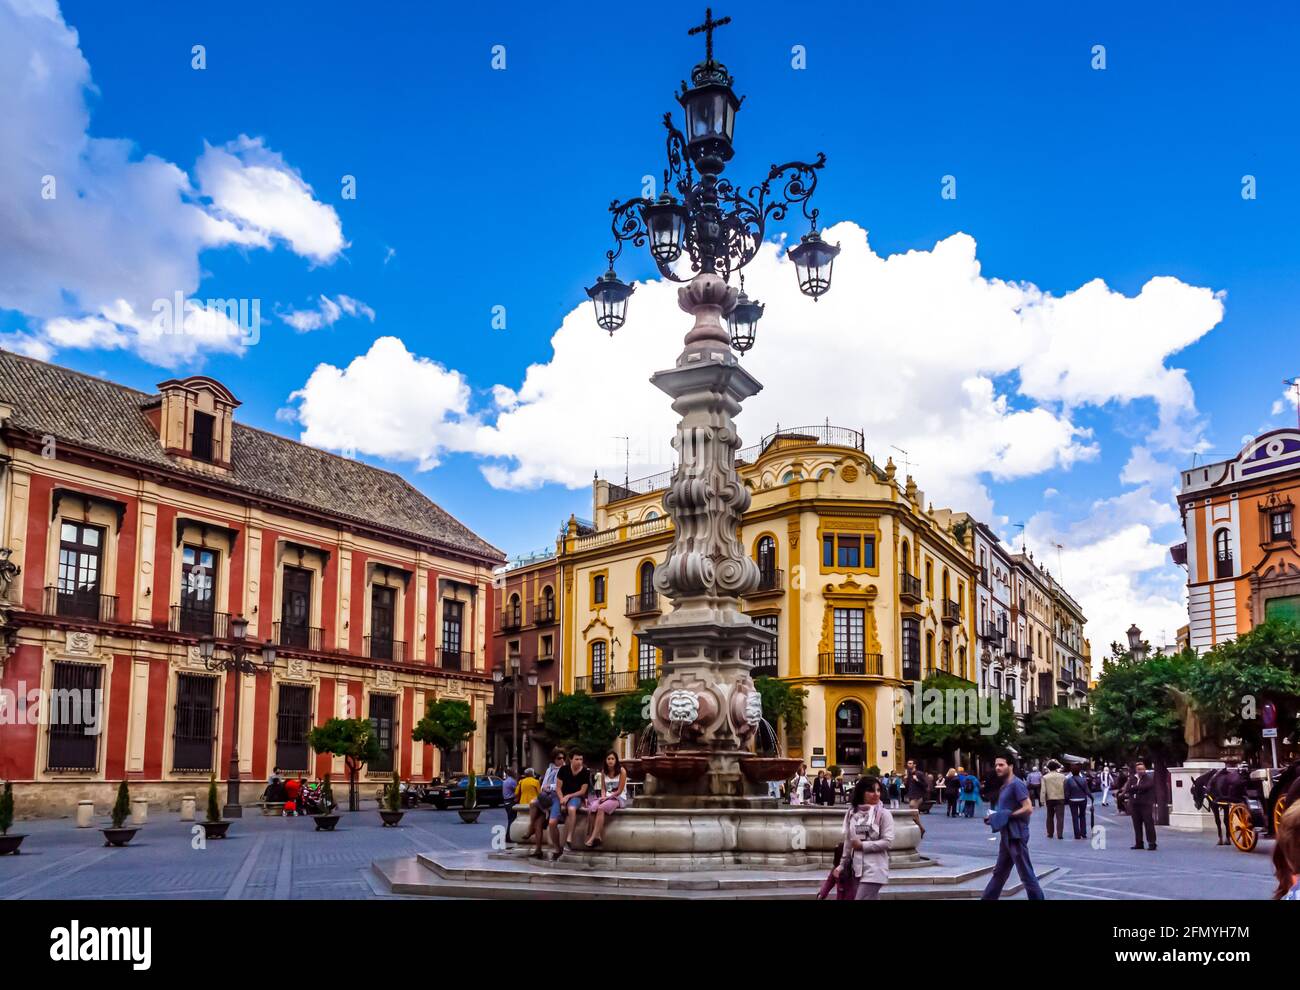 Seville, Andalusia, Spain - May 18, 2013: The beautiful streetlight with fountain on Plaza Virgen de los Reyes in Seville. Stock Photo